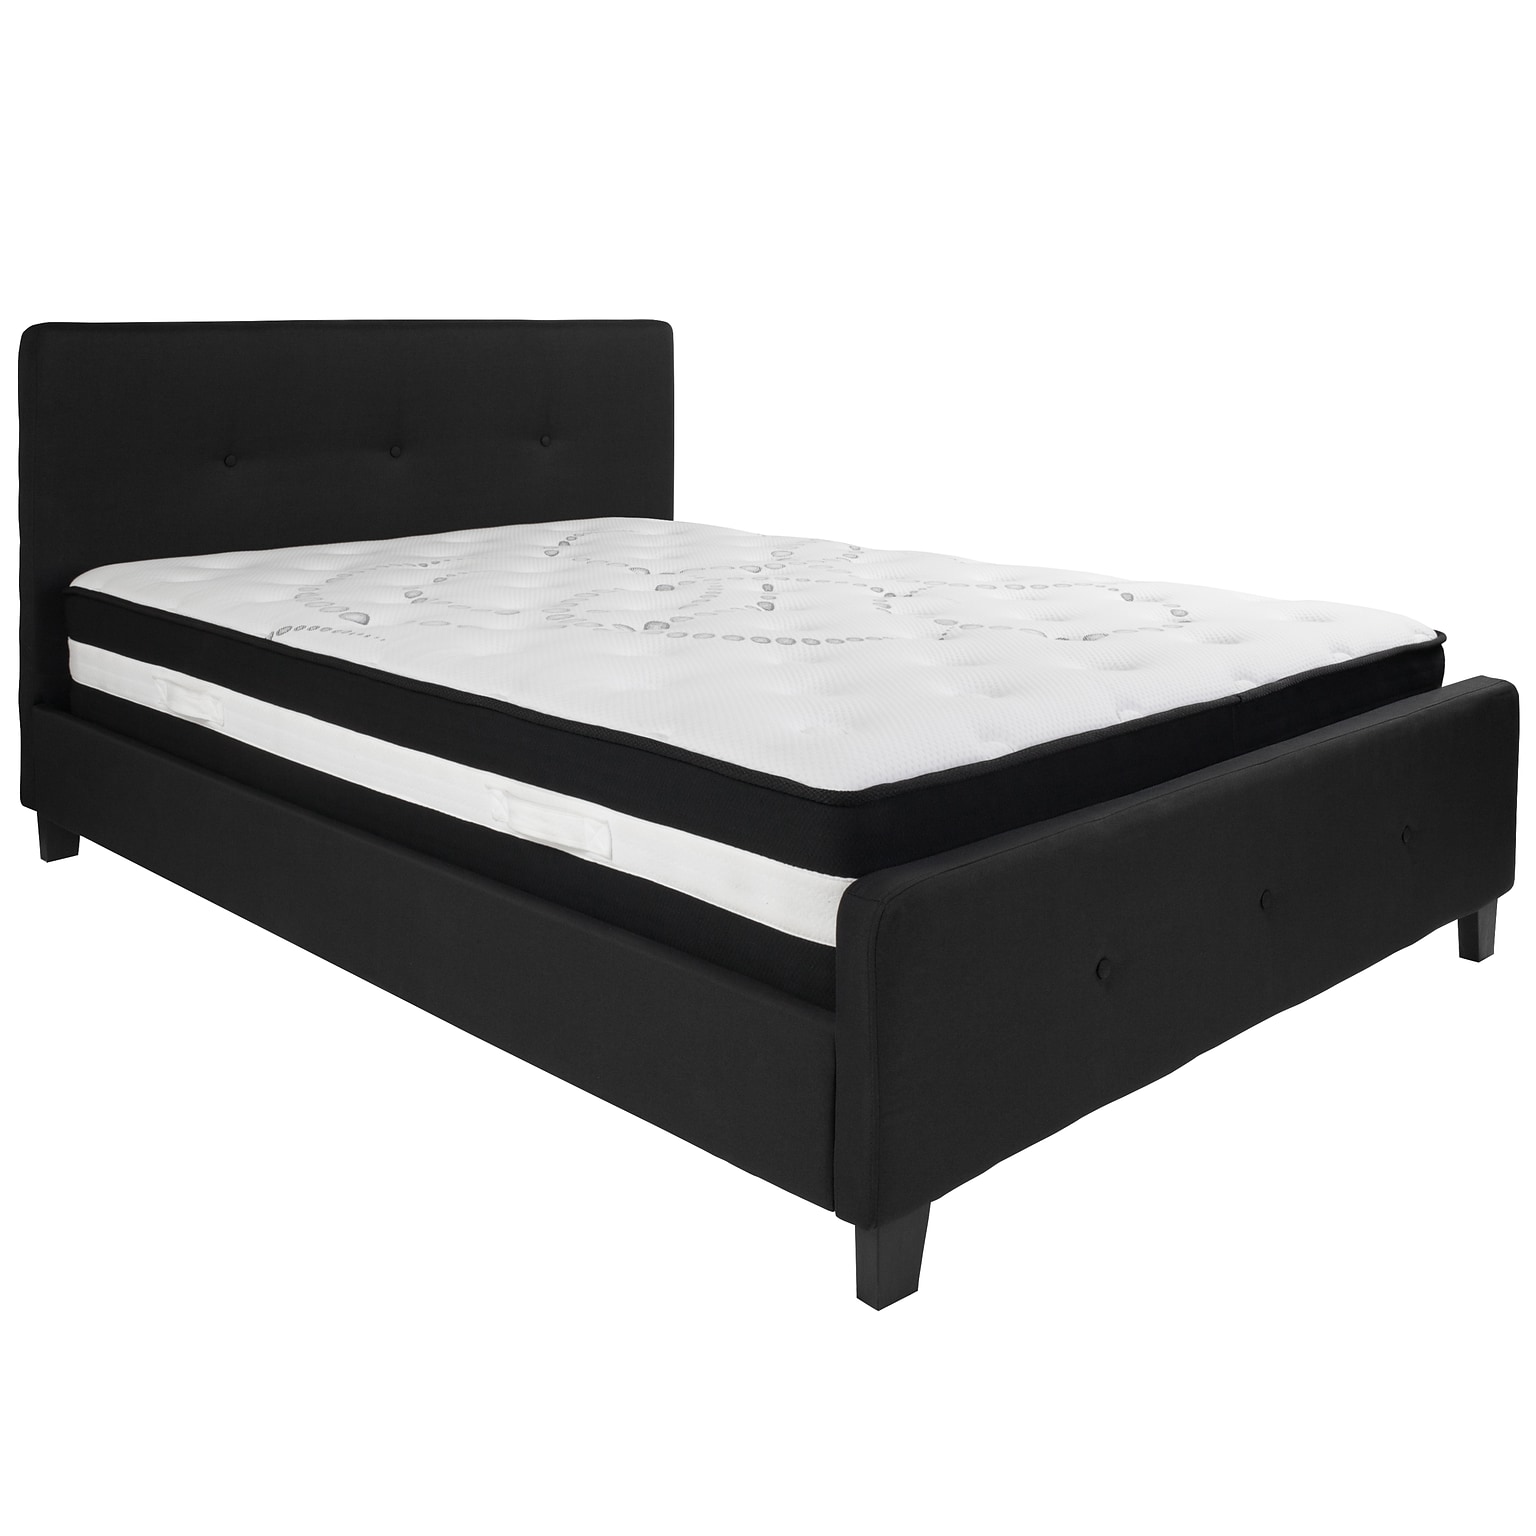 Flash Furniture Tribeca Tufted Upholstered Platform Bed in Black Fabric with Pocket Spring Mattress, Queen (HGBM23)